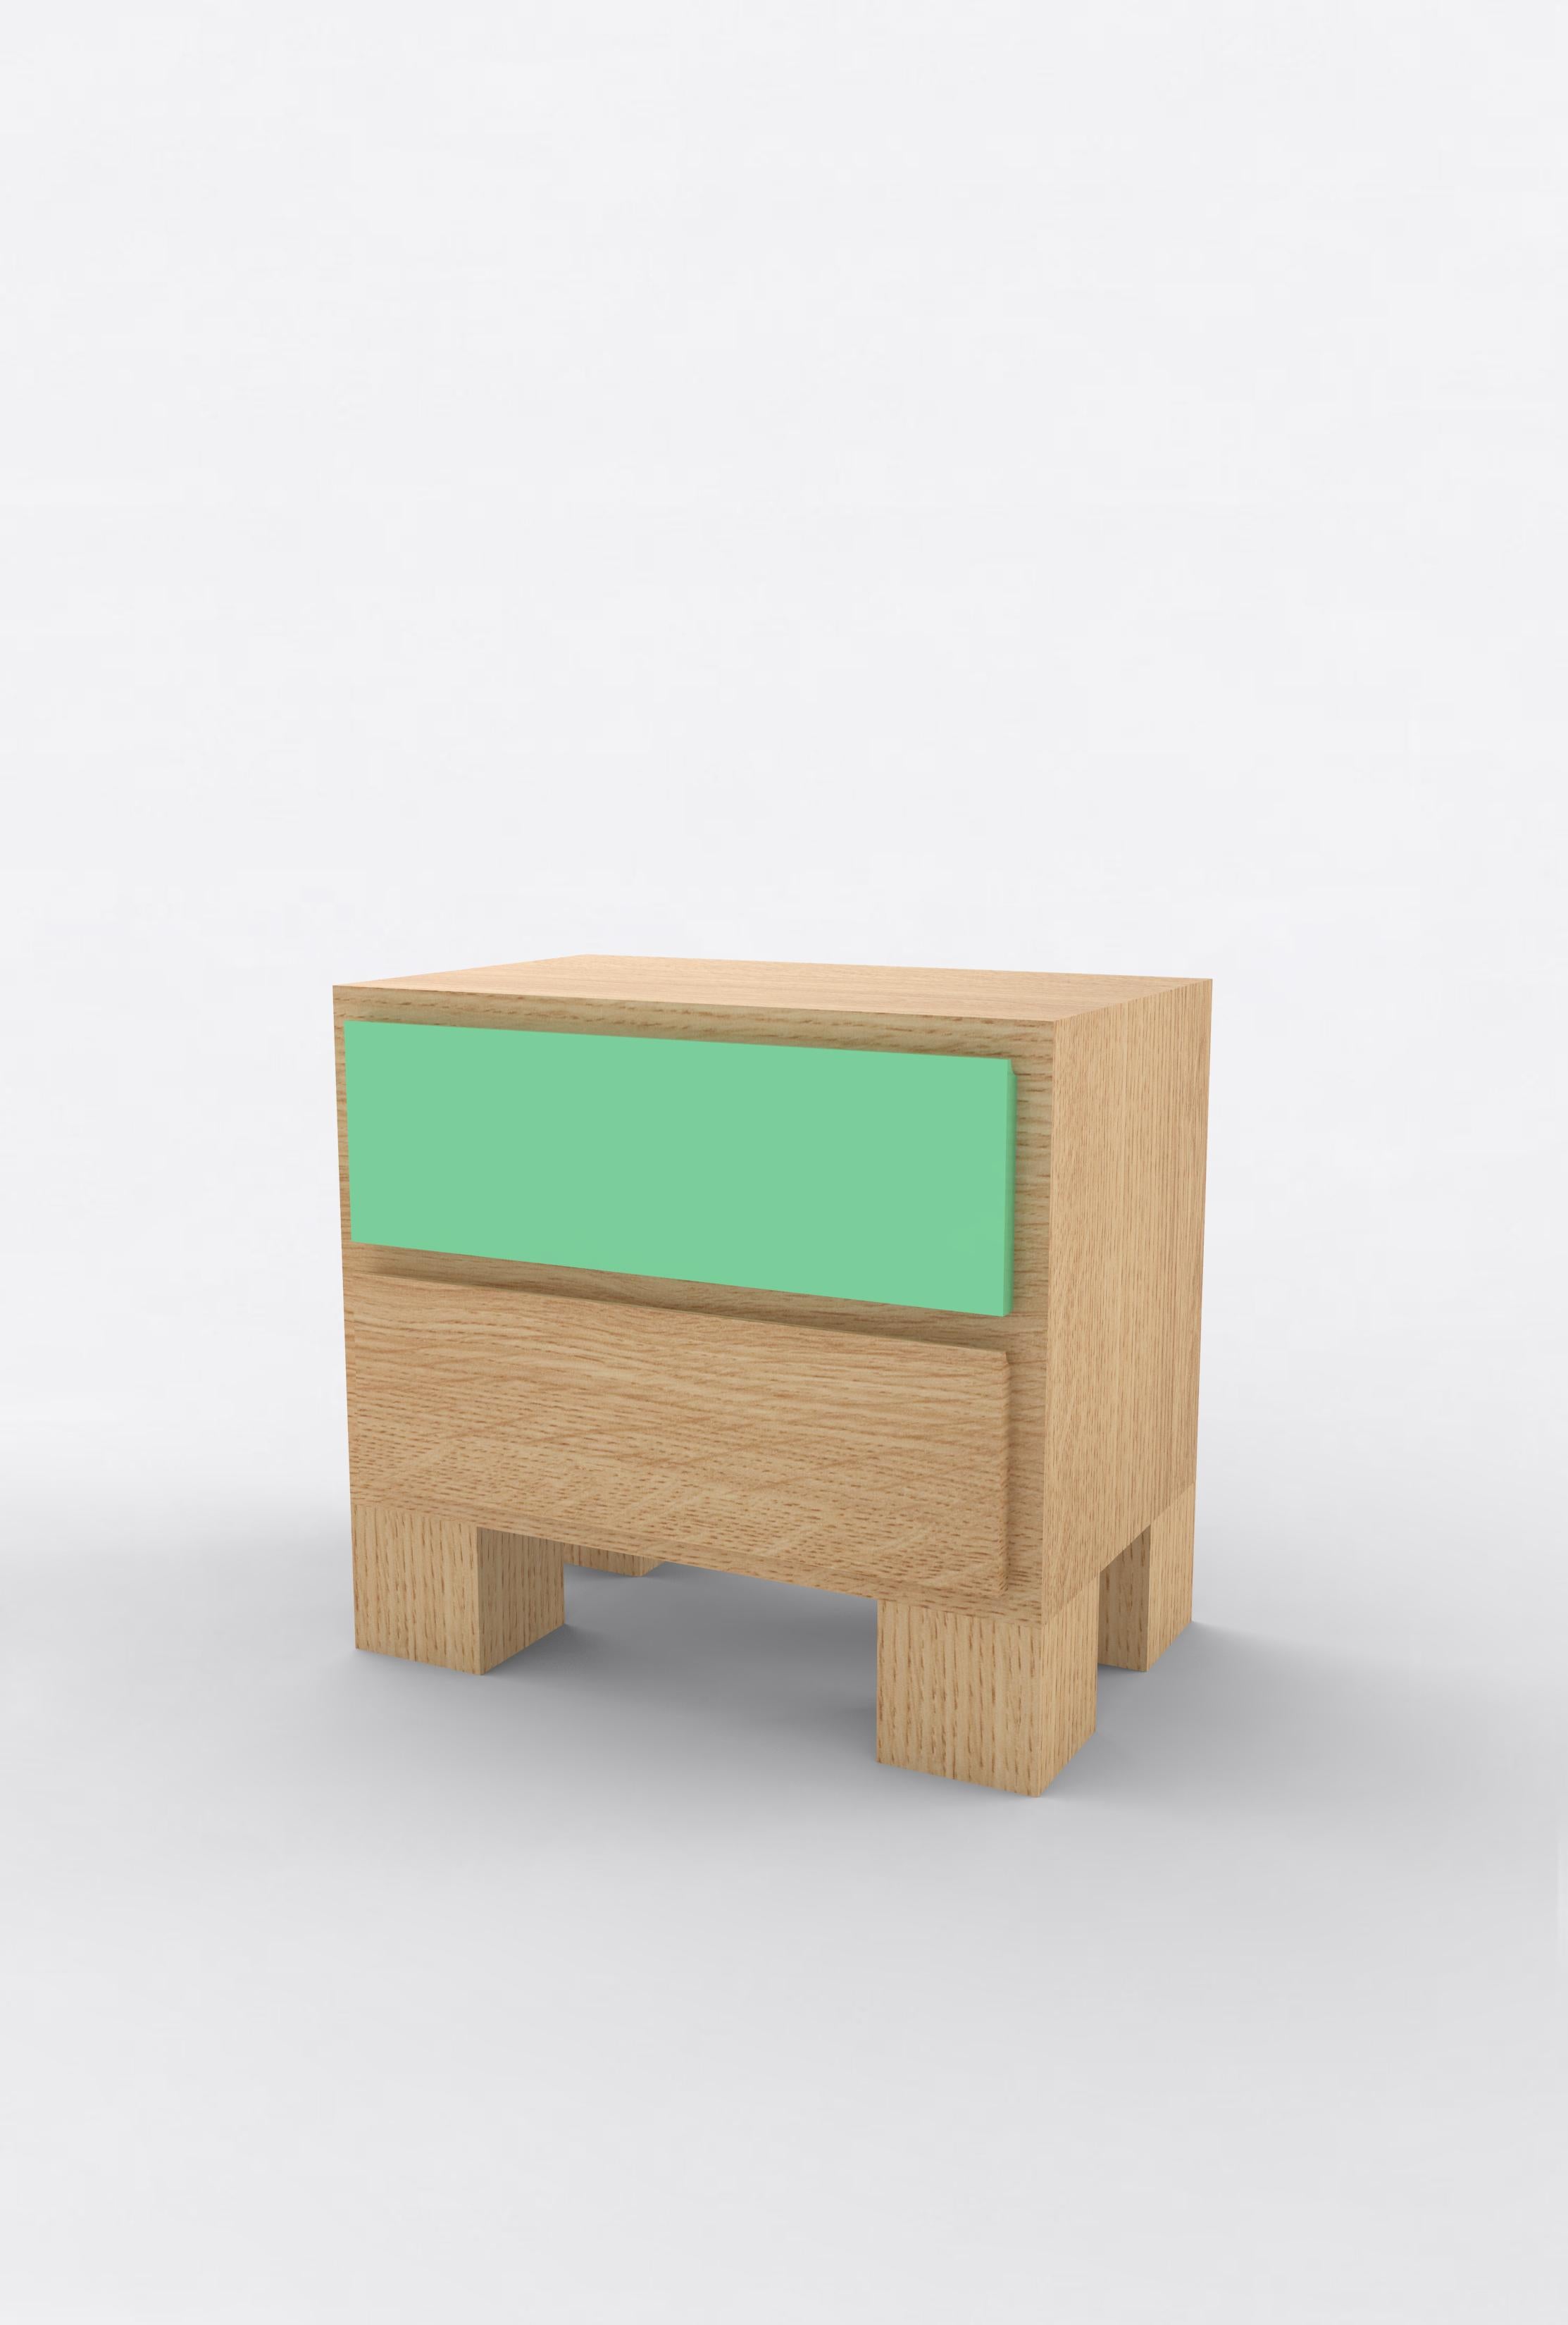 American Contemporary 101 Bedside in Oak and Color by Orphan Work, 2020 For Sale